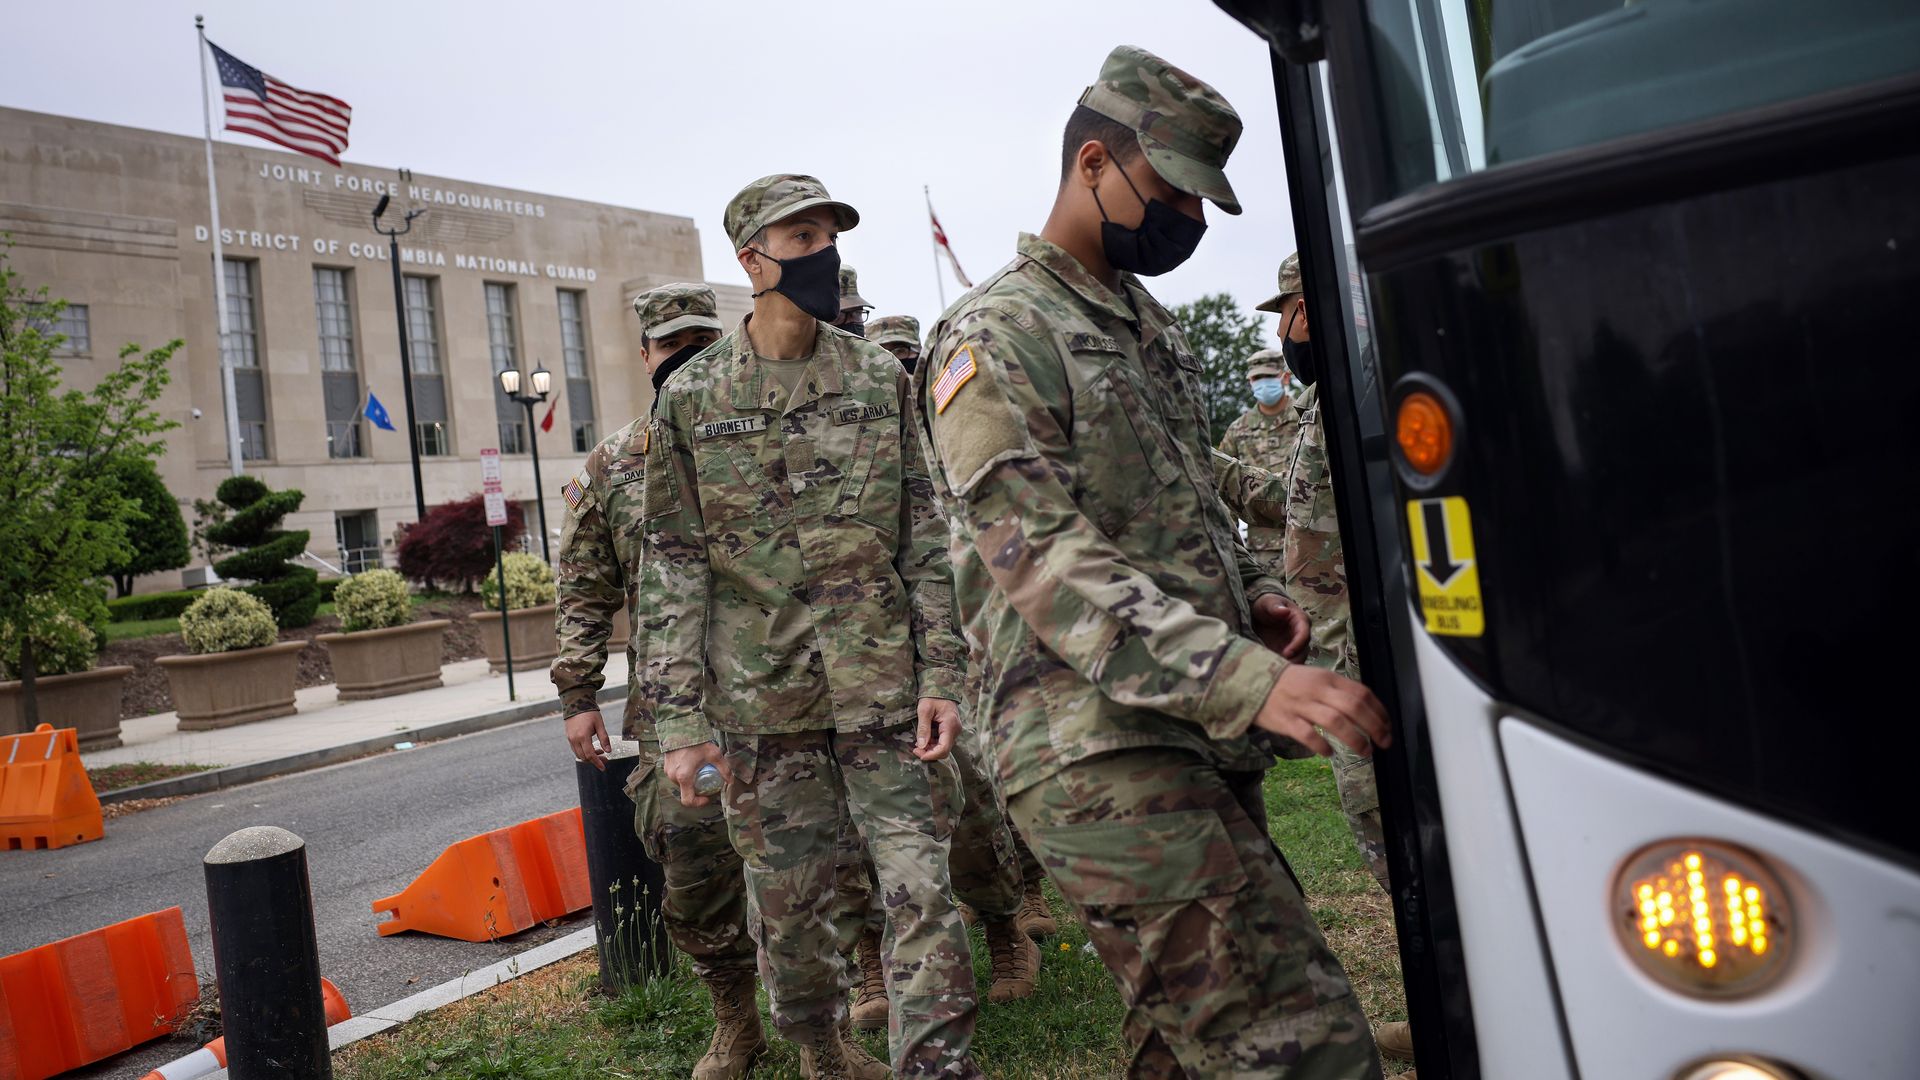 Members of the National Guard as seen leaving the D.C. Armory after completing their mission to protect the U.S. Capitol.